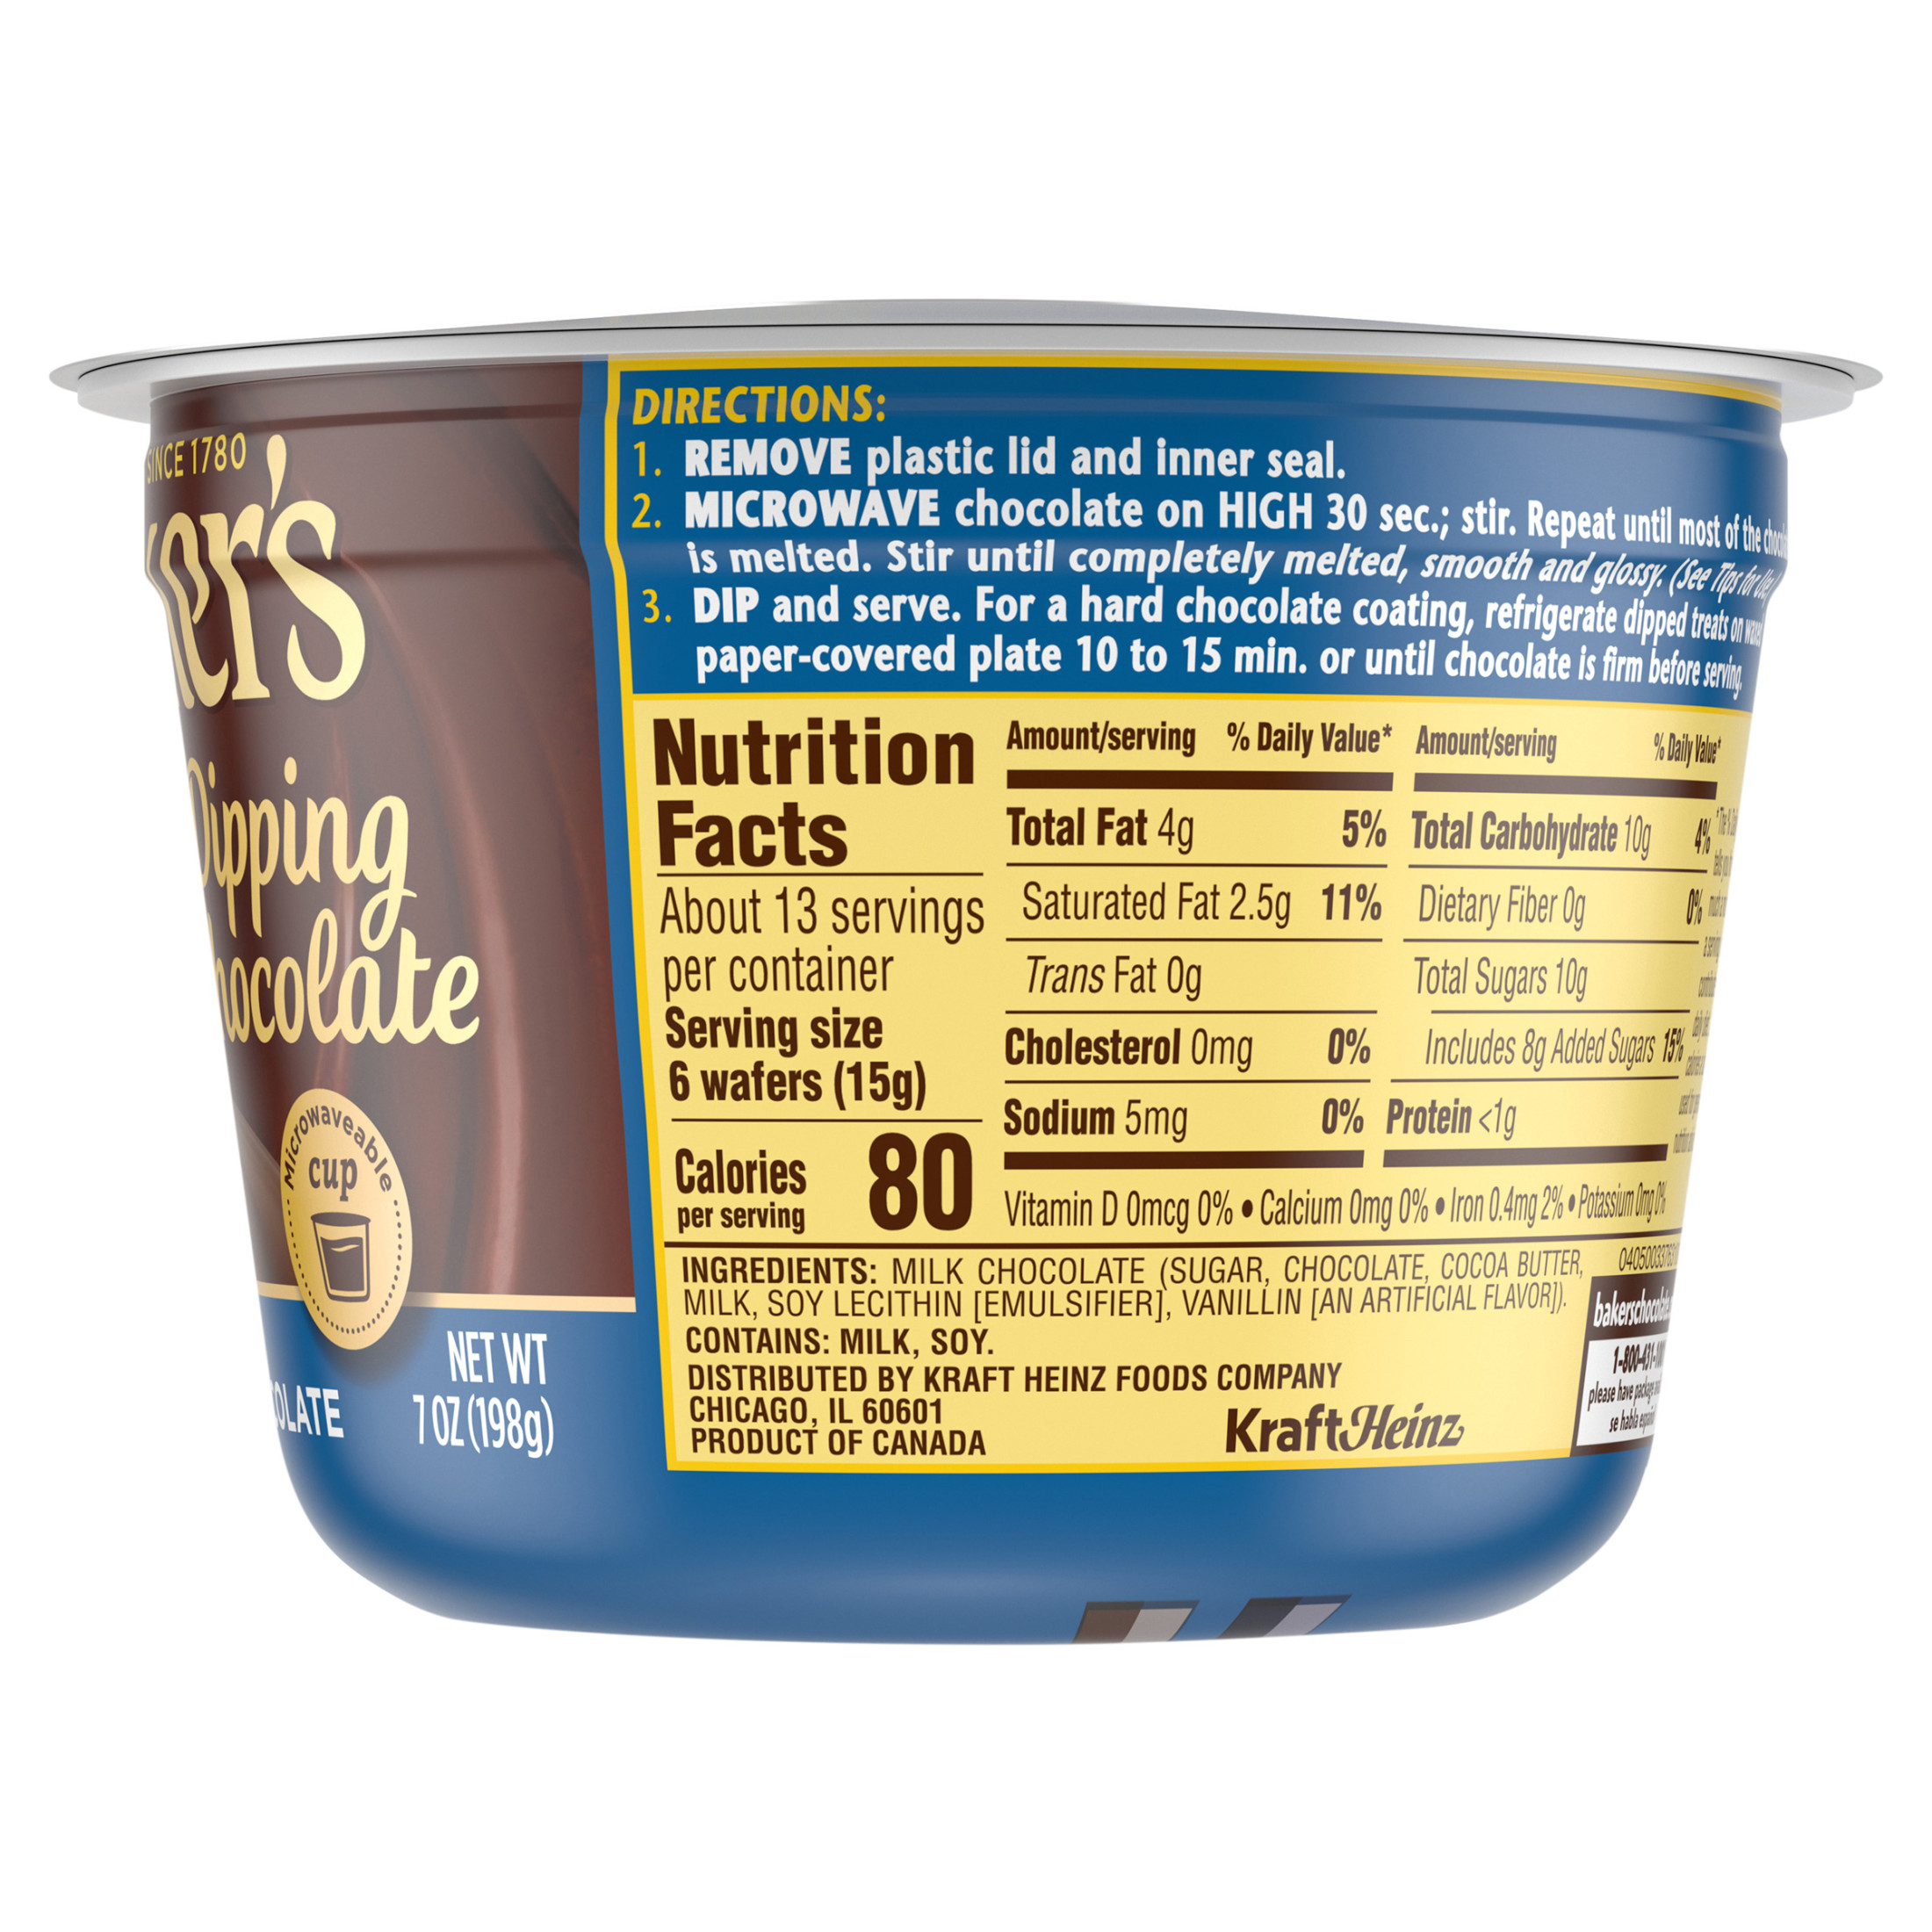 Baker's Real Milk Dipping Chocolate, 7 oz Cup - image 5 of 6